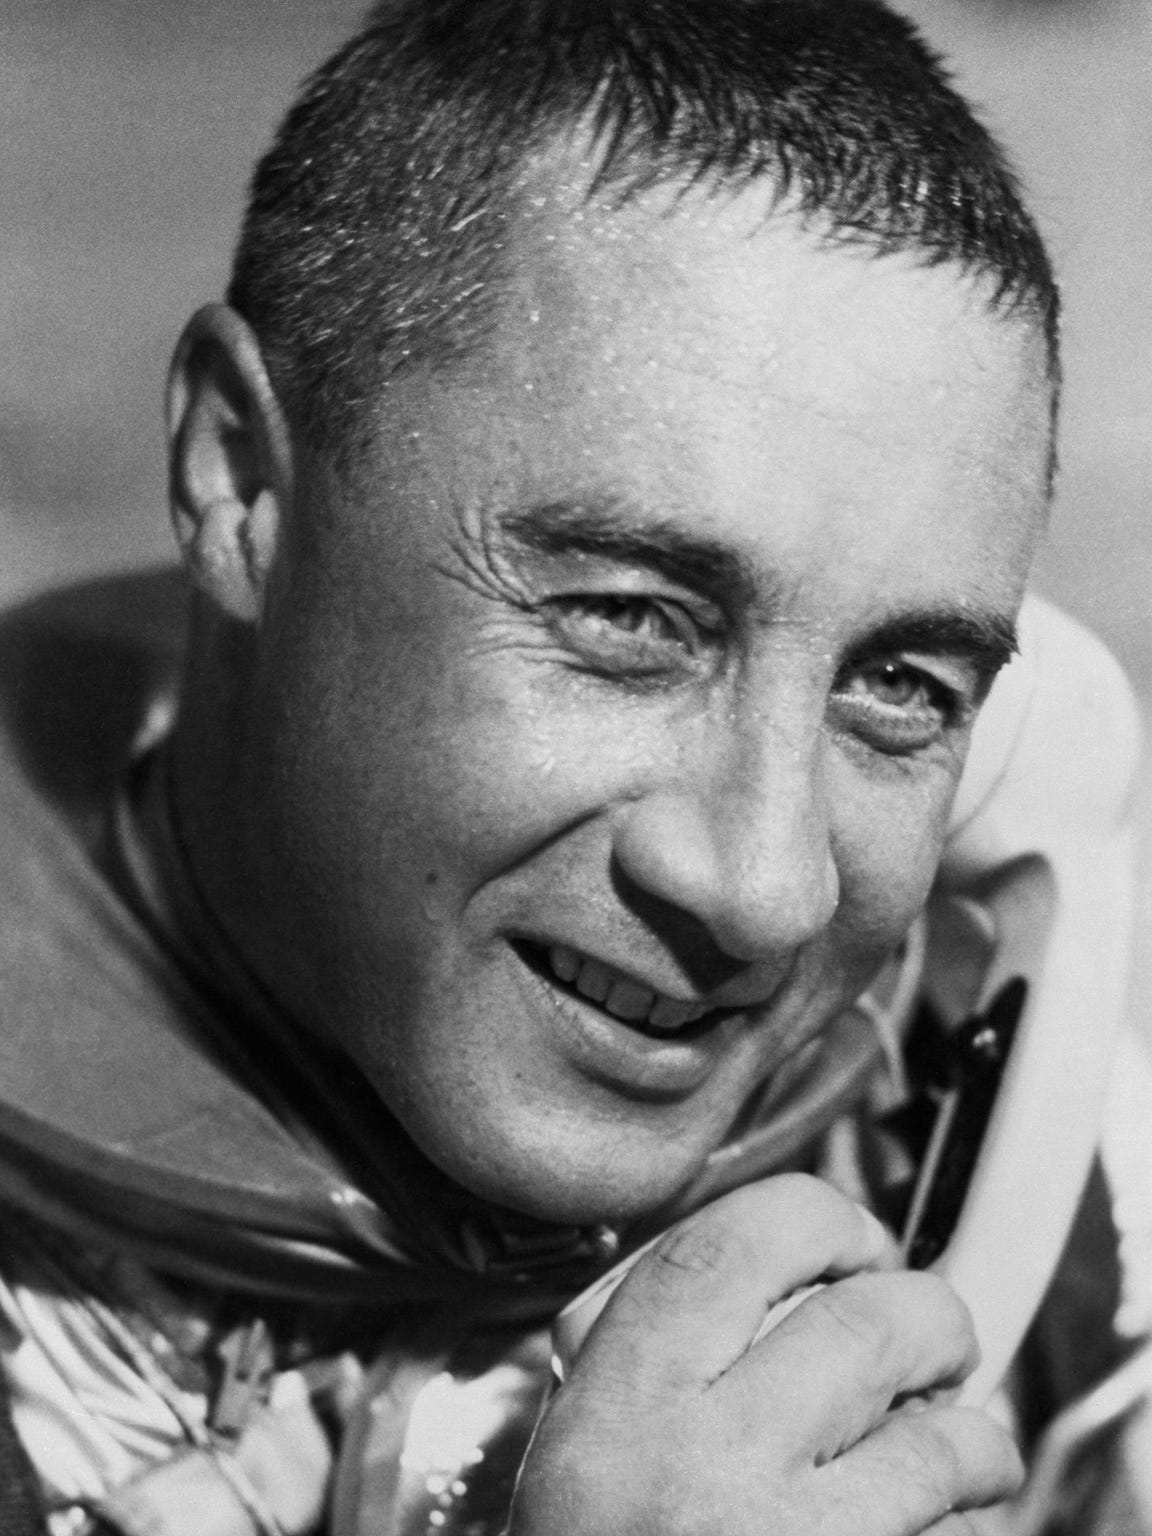 Gus Grissom: Life and legacy of the 'forgotten' Hoosier astronaut1152 x 1536